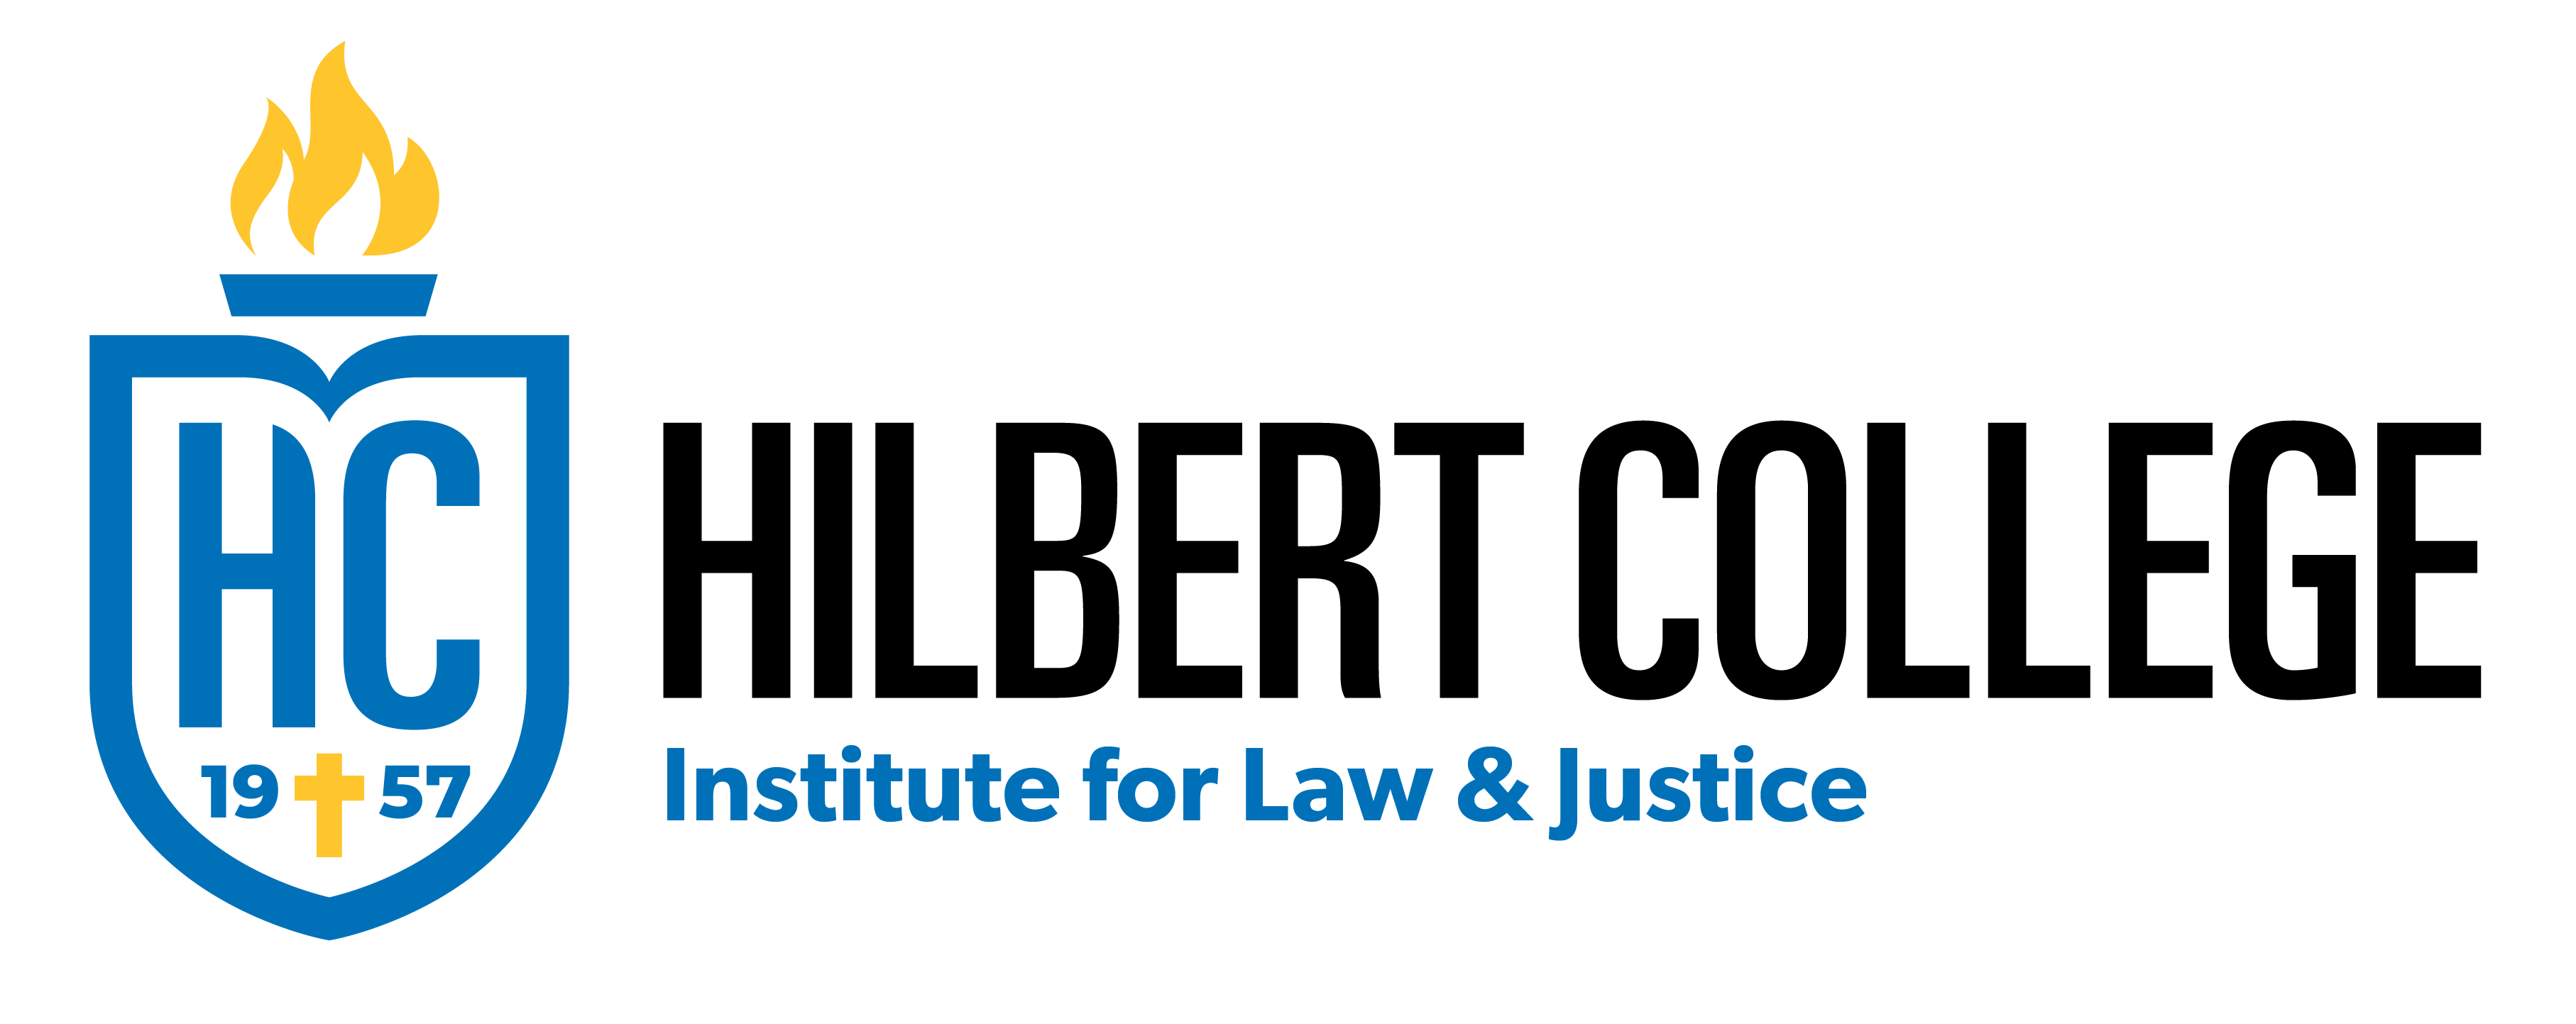 Institute for law and justice - wordmark logo